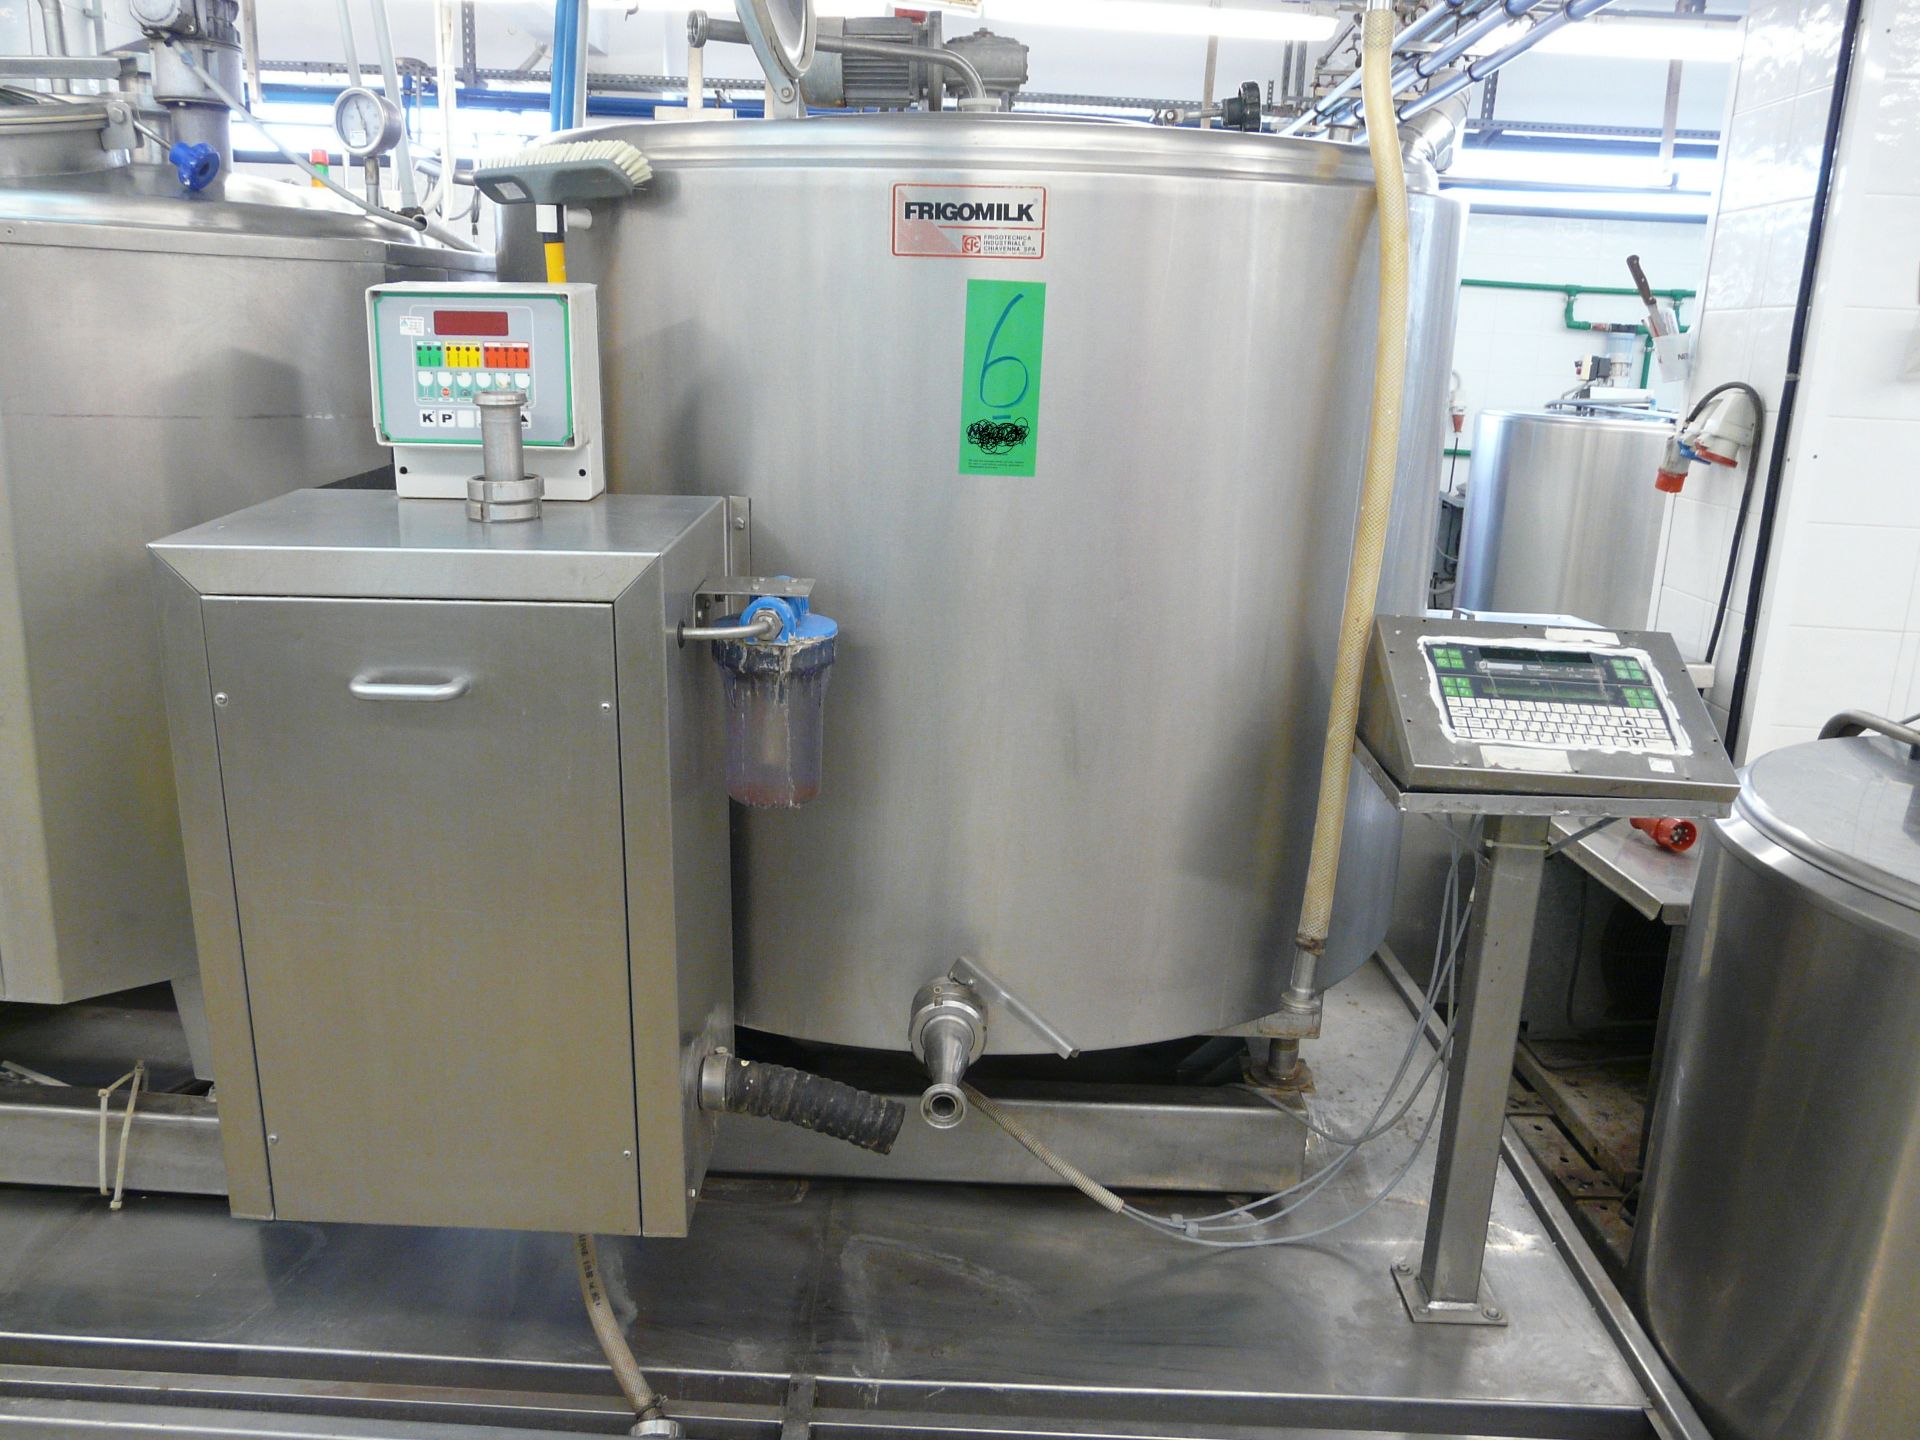 Mixing/Cooling Tank for Ice Cream 1000L with agitator, Type FRIGOMILK,Self contained Freon Condenser